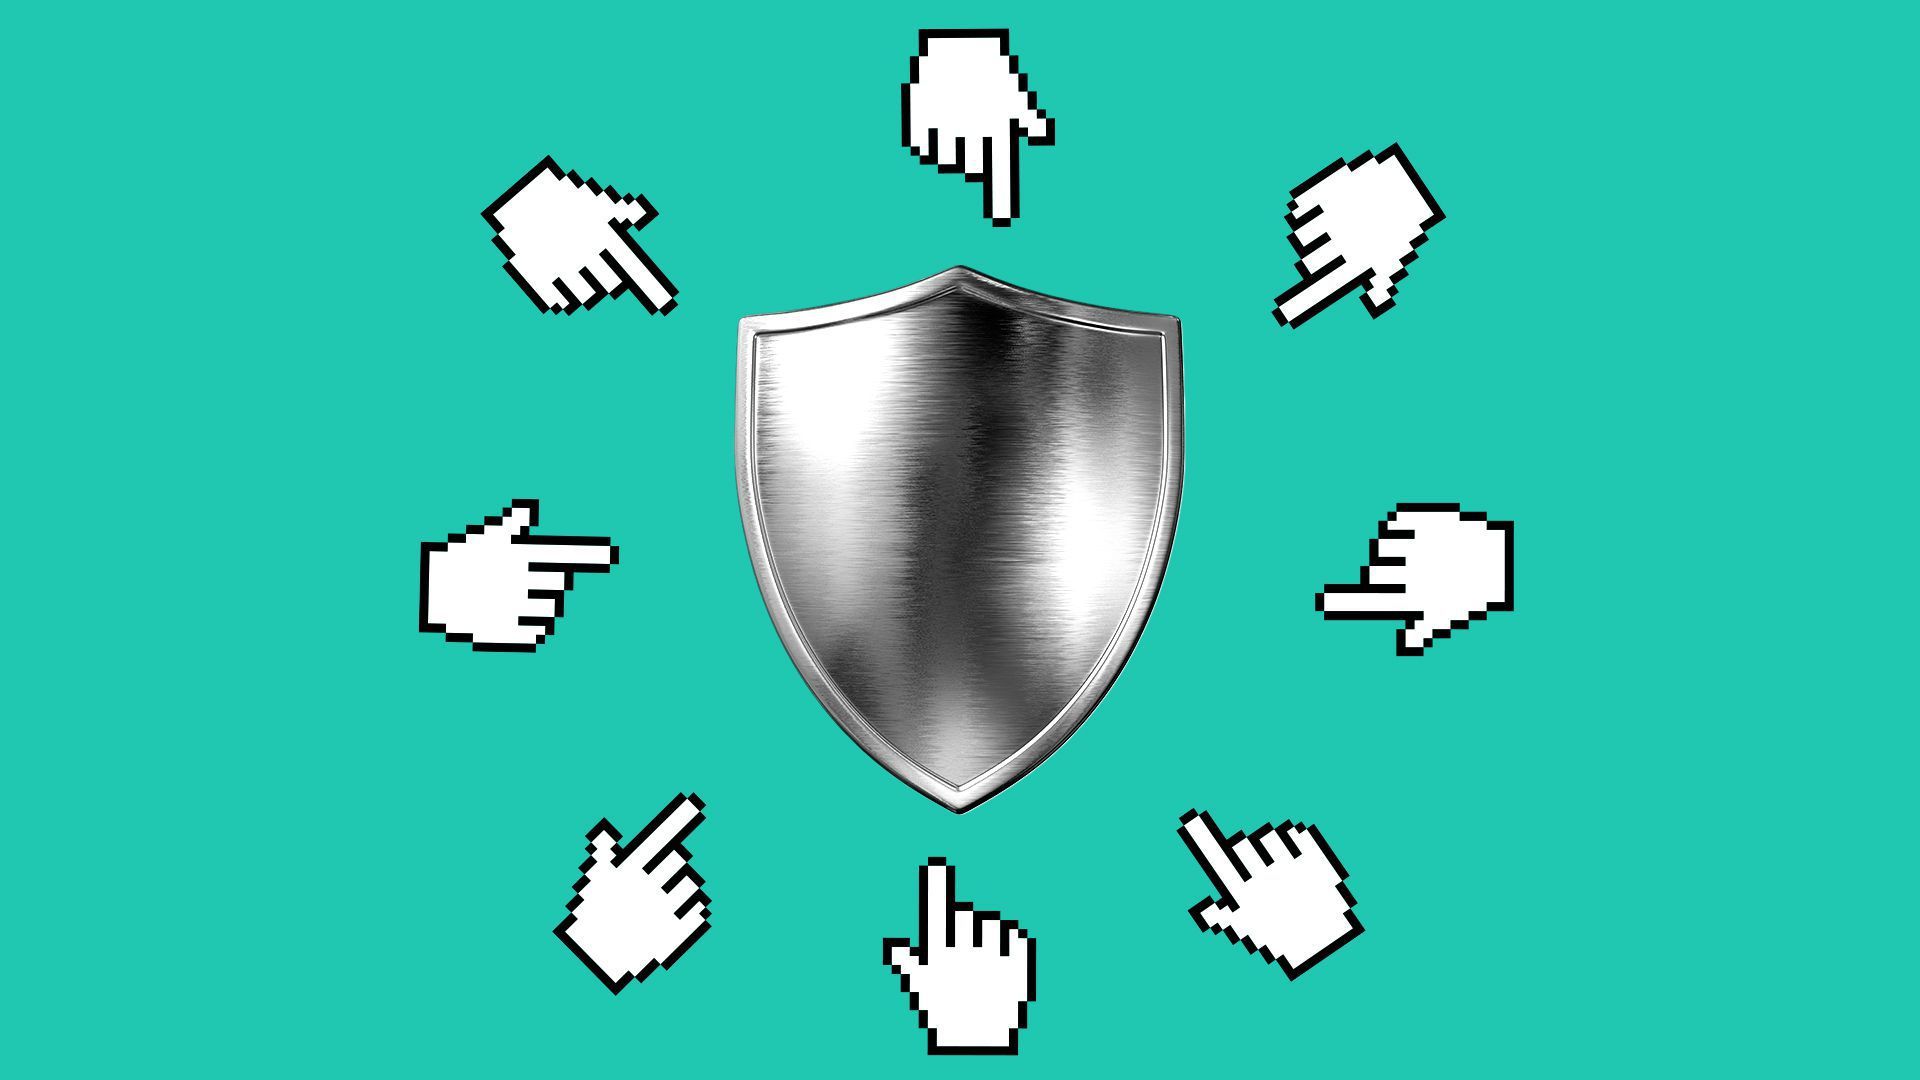 An illustration of mouse cursors pointing at a shield.